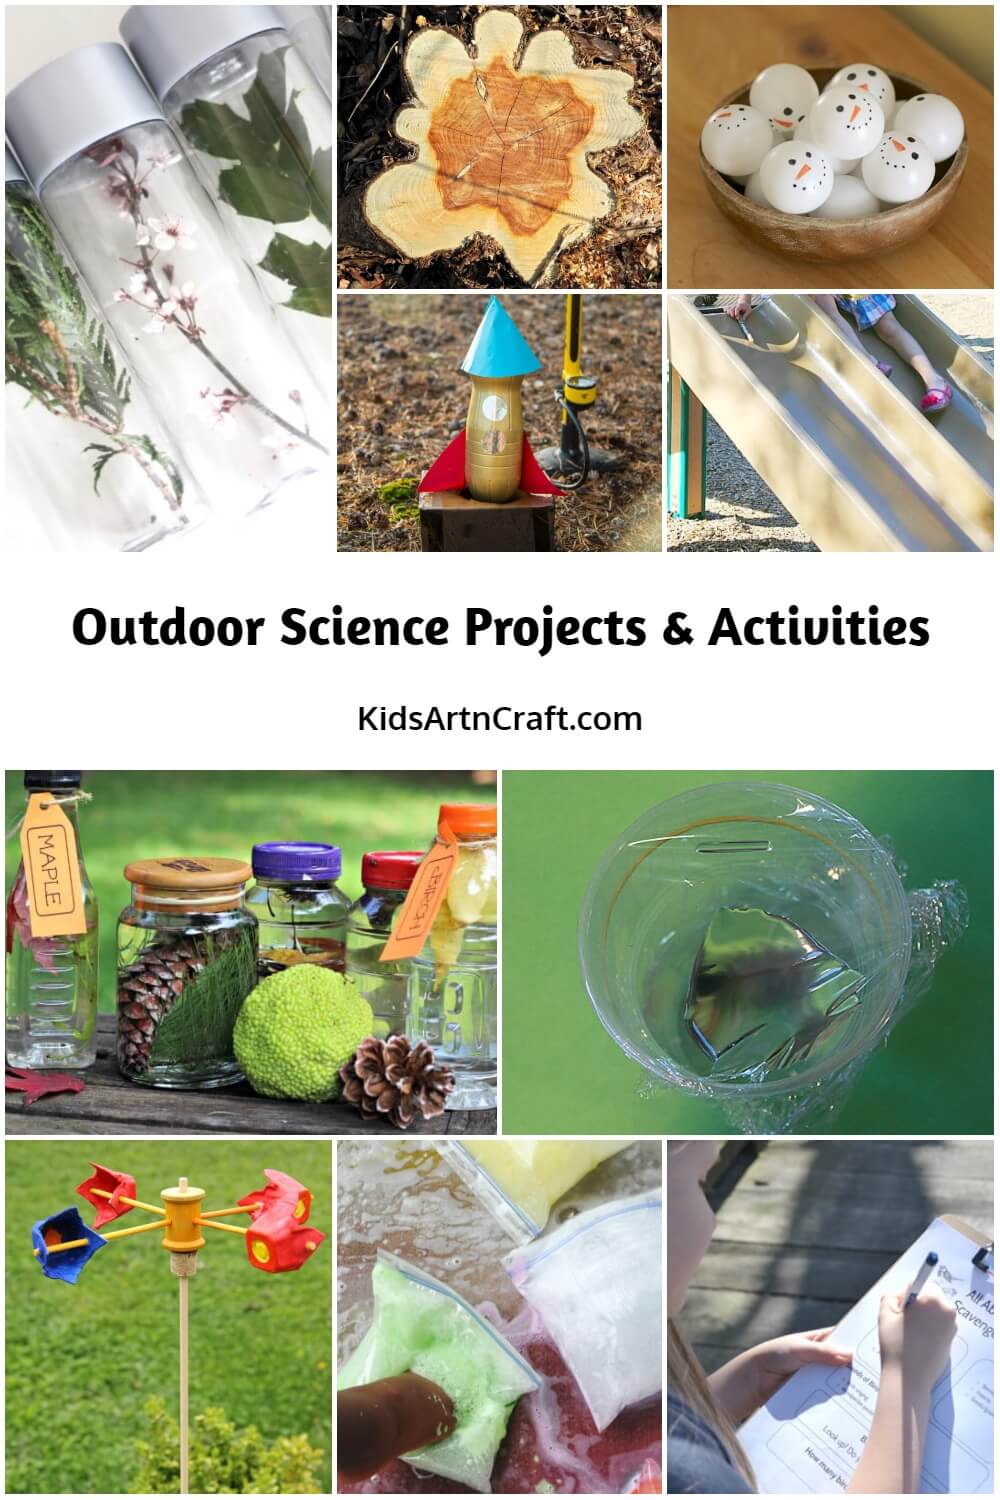 Outdoor Science Projects and Activities